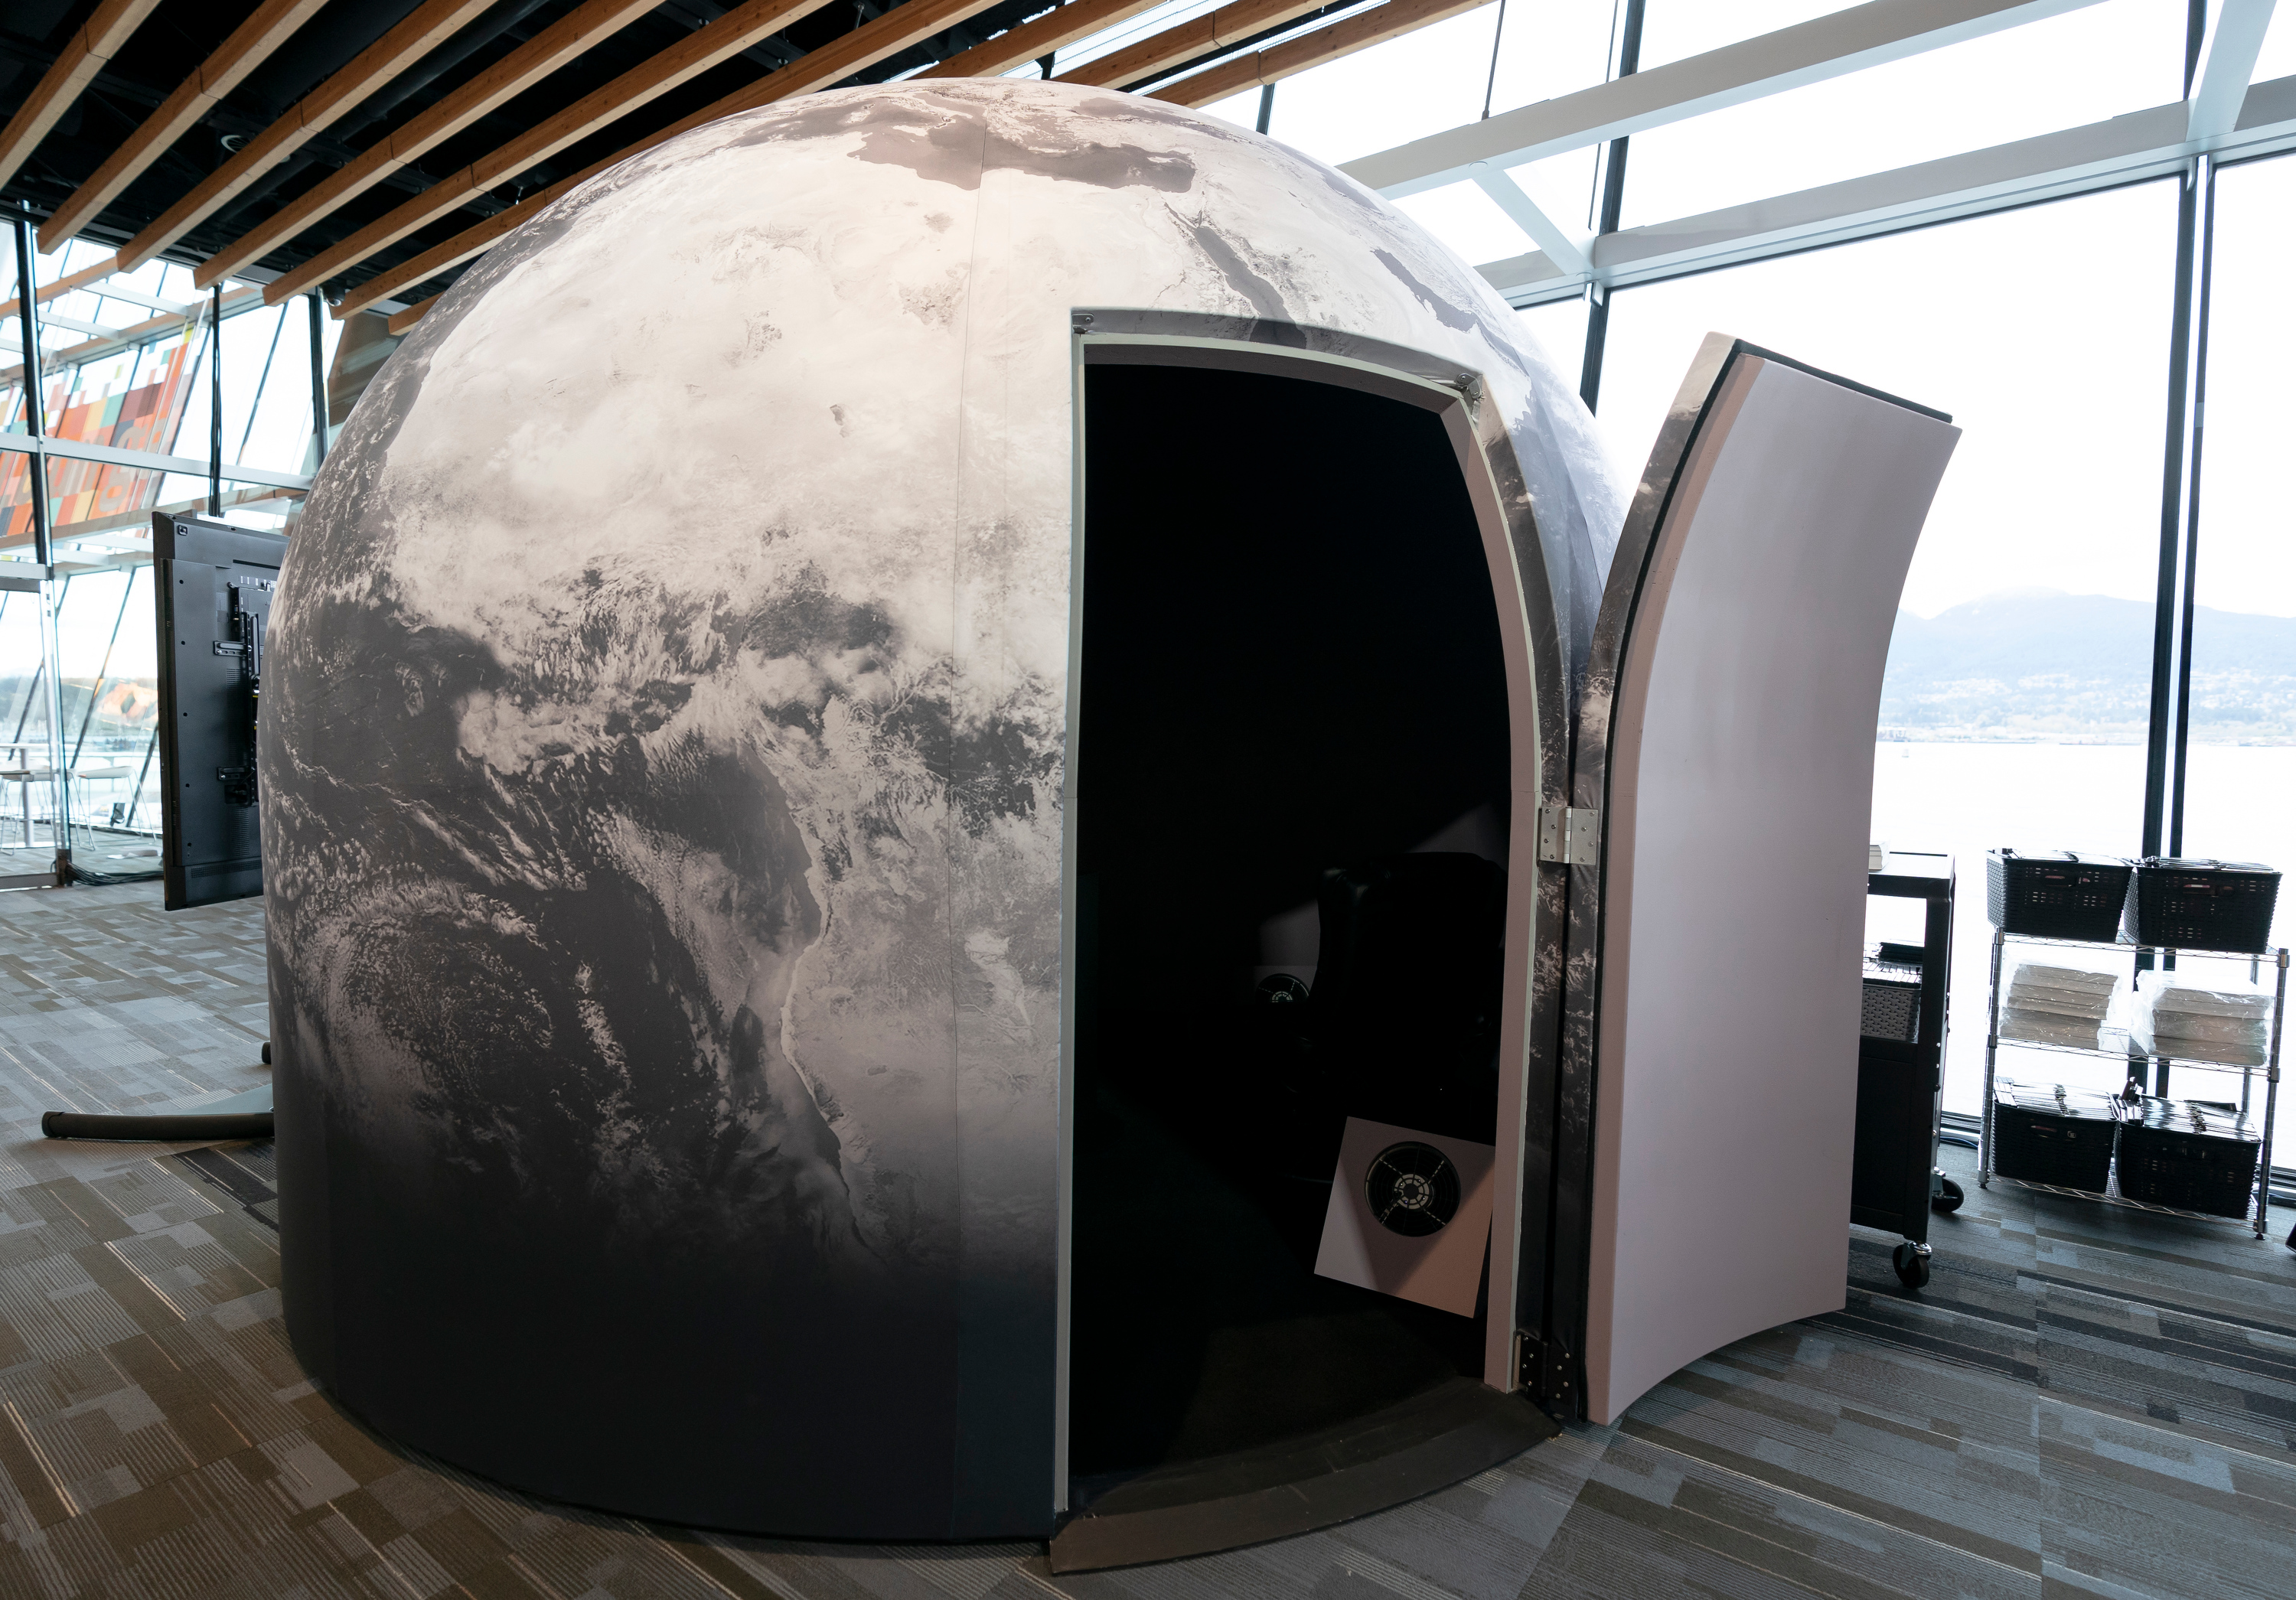 DuPont n:ow dome at TED2019